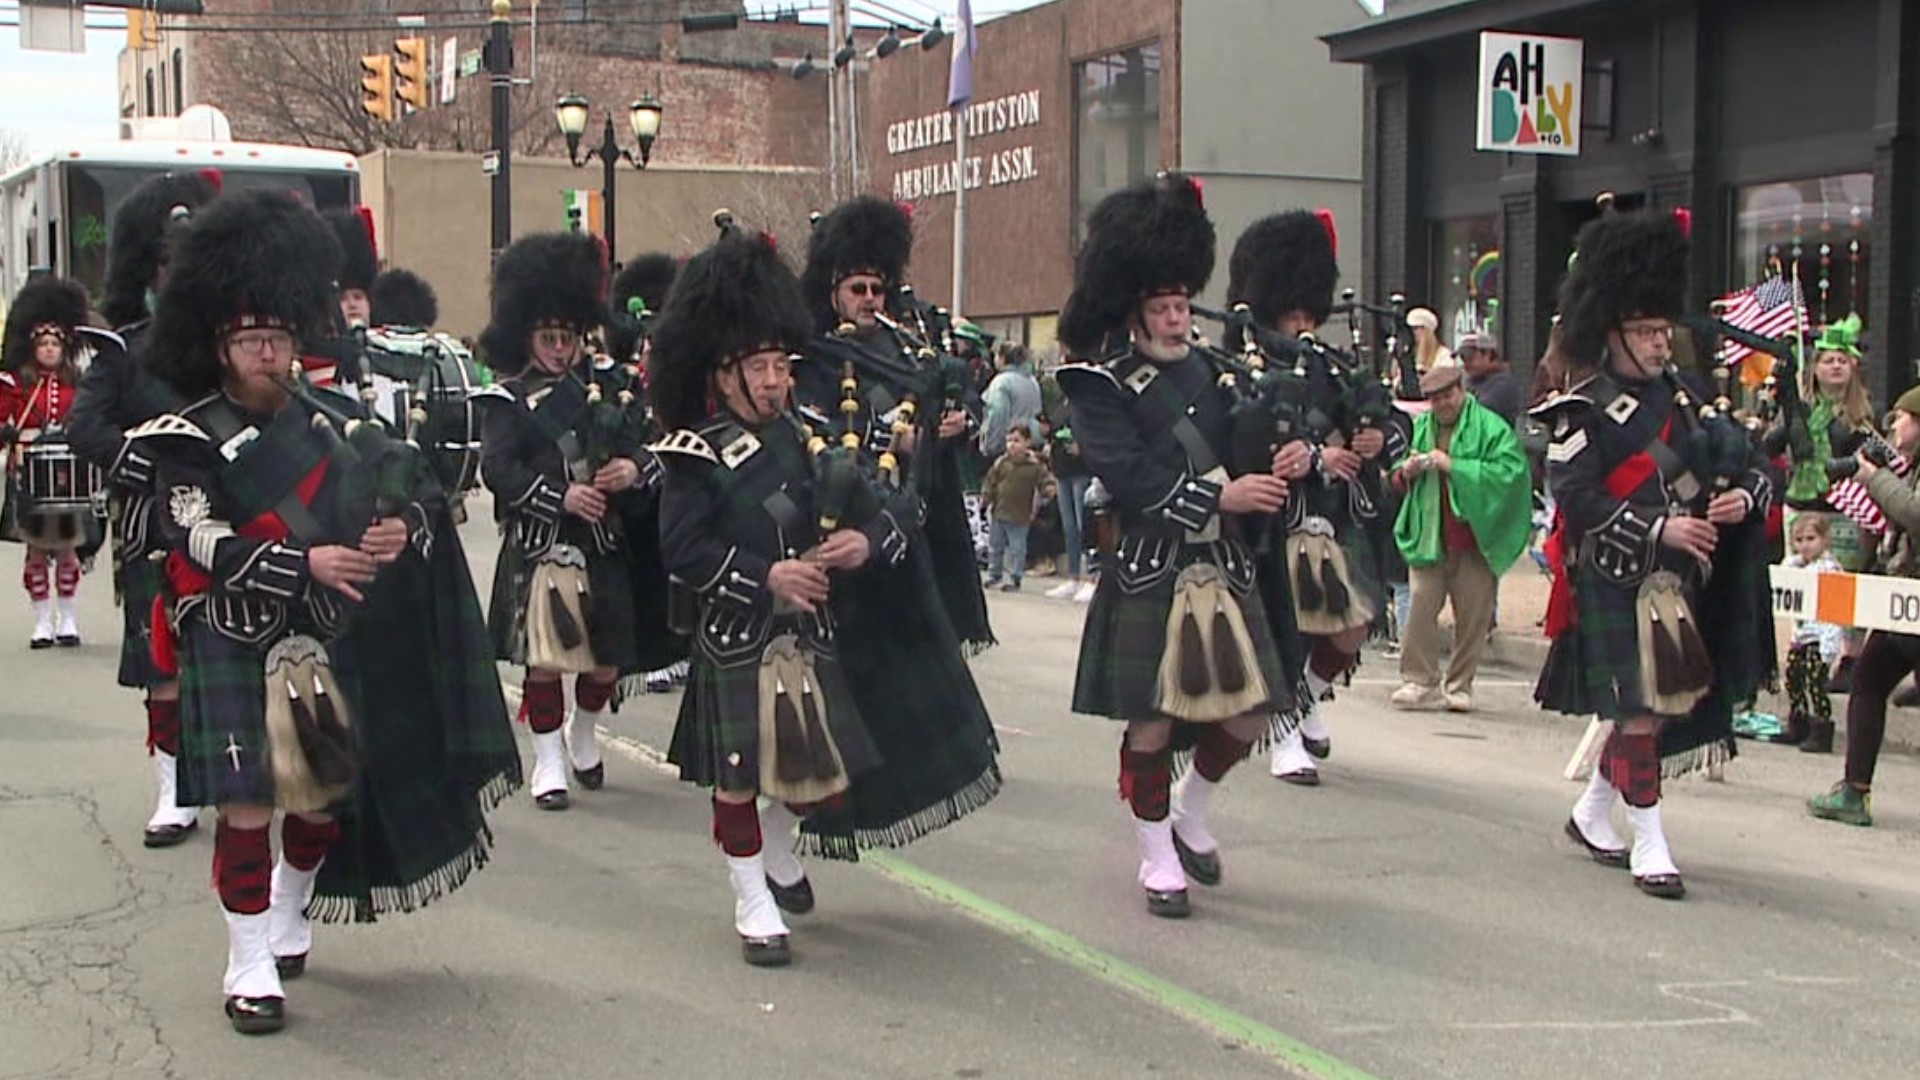 After a year off, parade-goers were happy to see the streets of Pittston filled with green again.